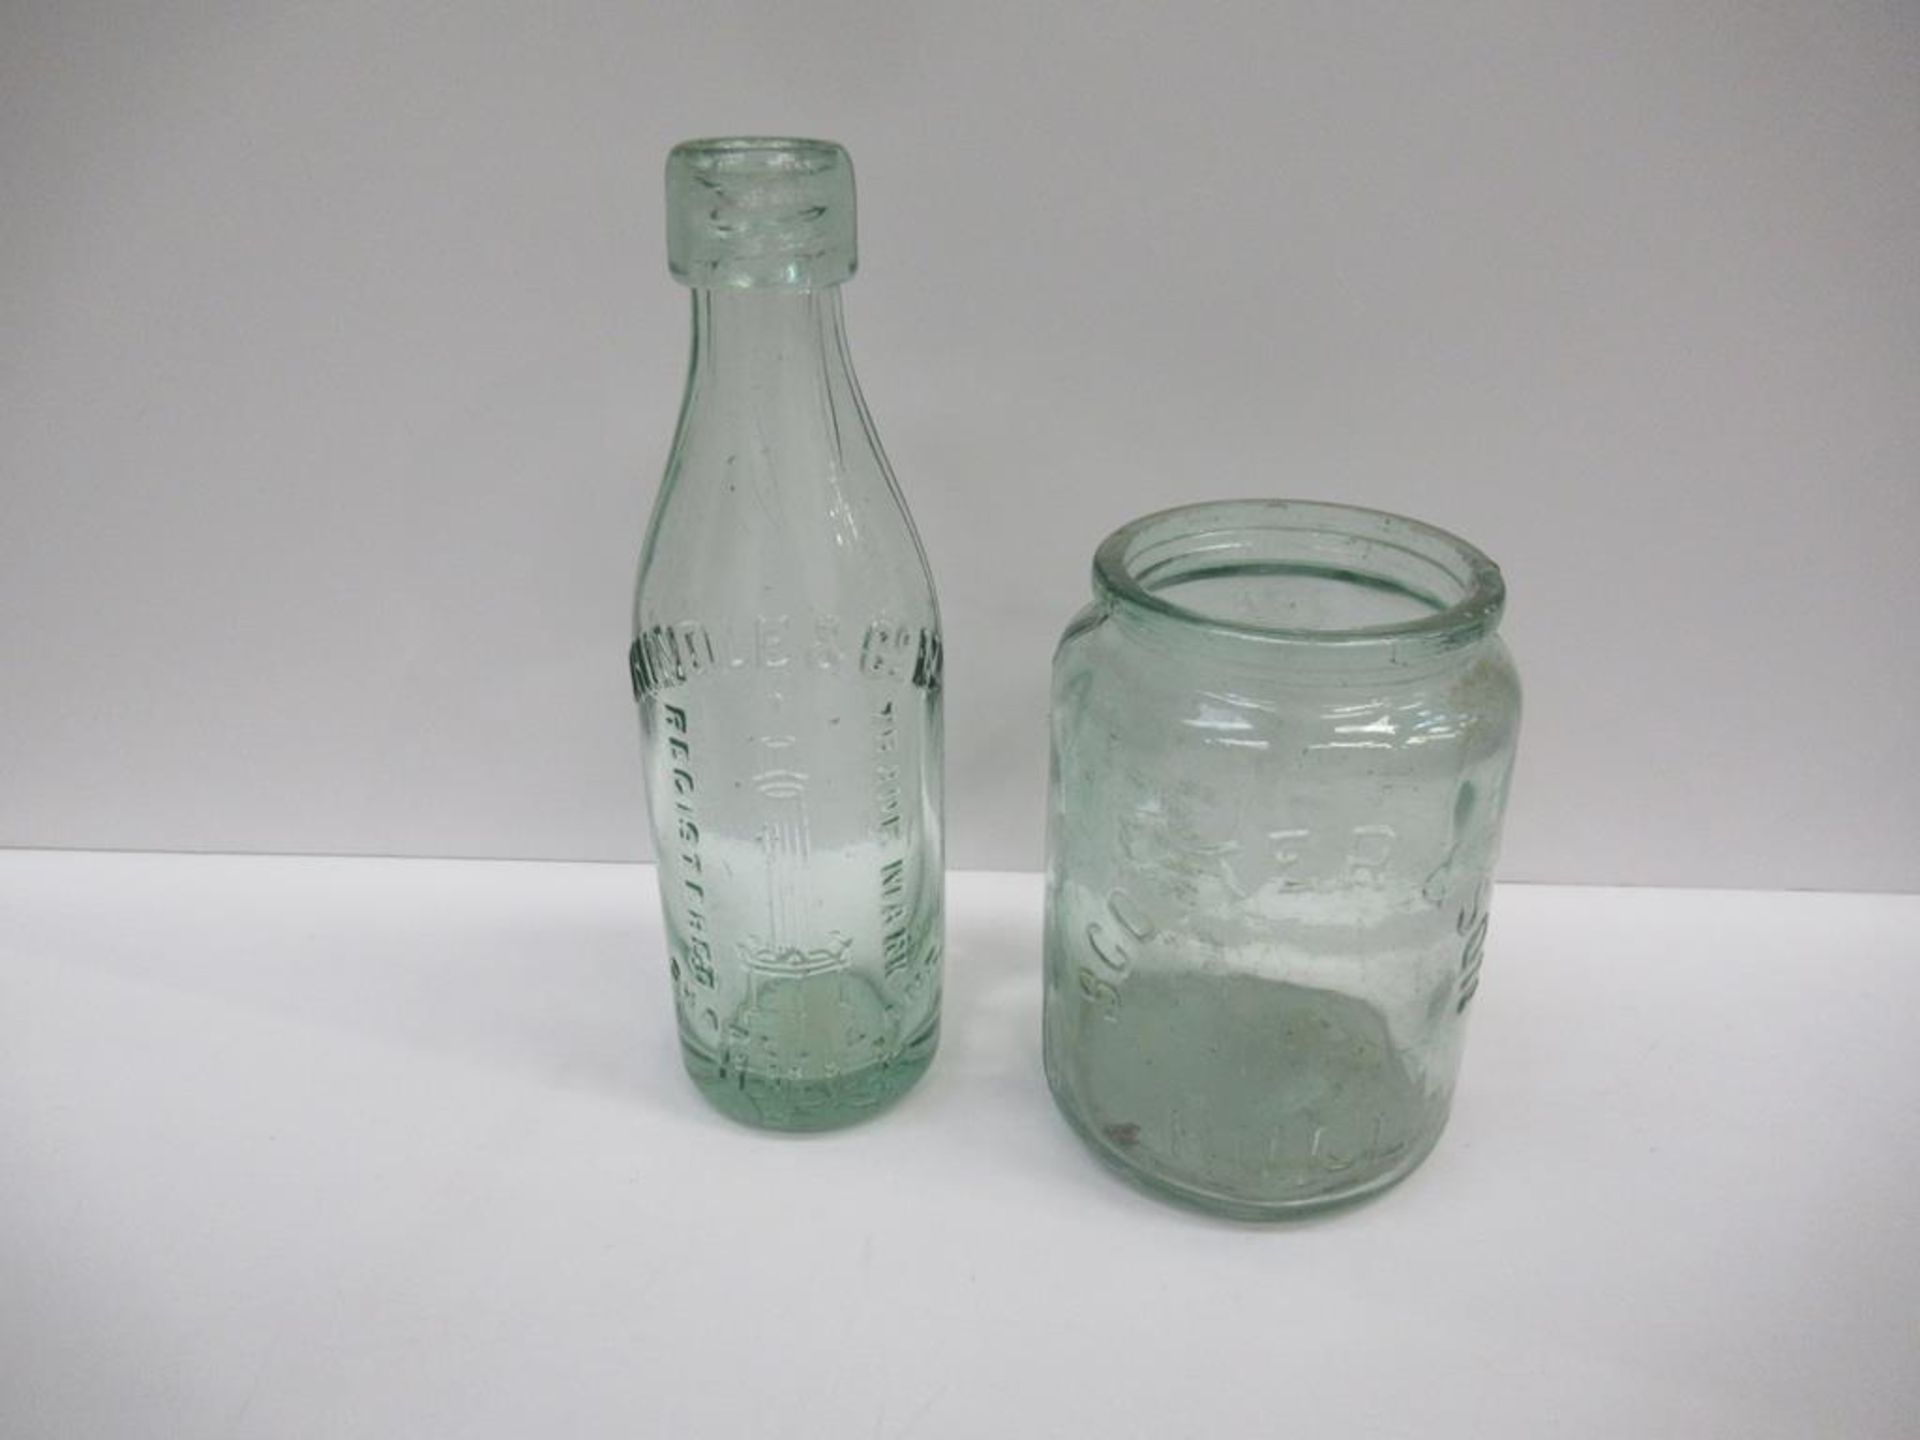 5x Hull Bottles Including Hindle & Co Ltd (3) and T. Linsley & Co Ltd (2) and a Hull Scotter & Son J - Image 18 of 25